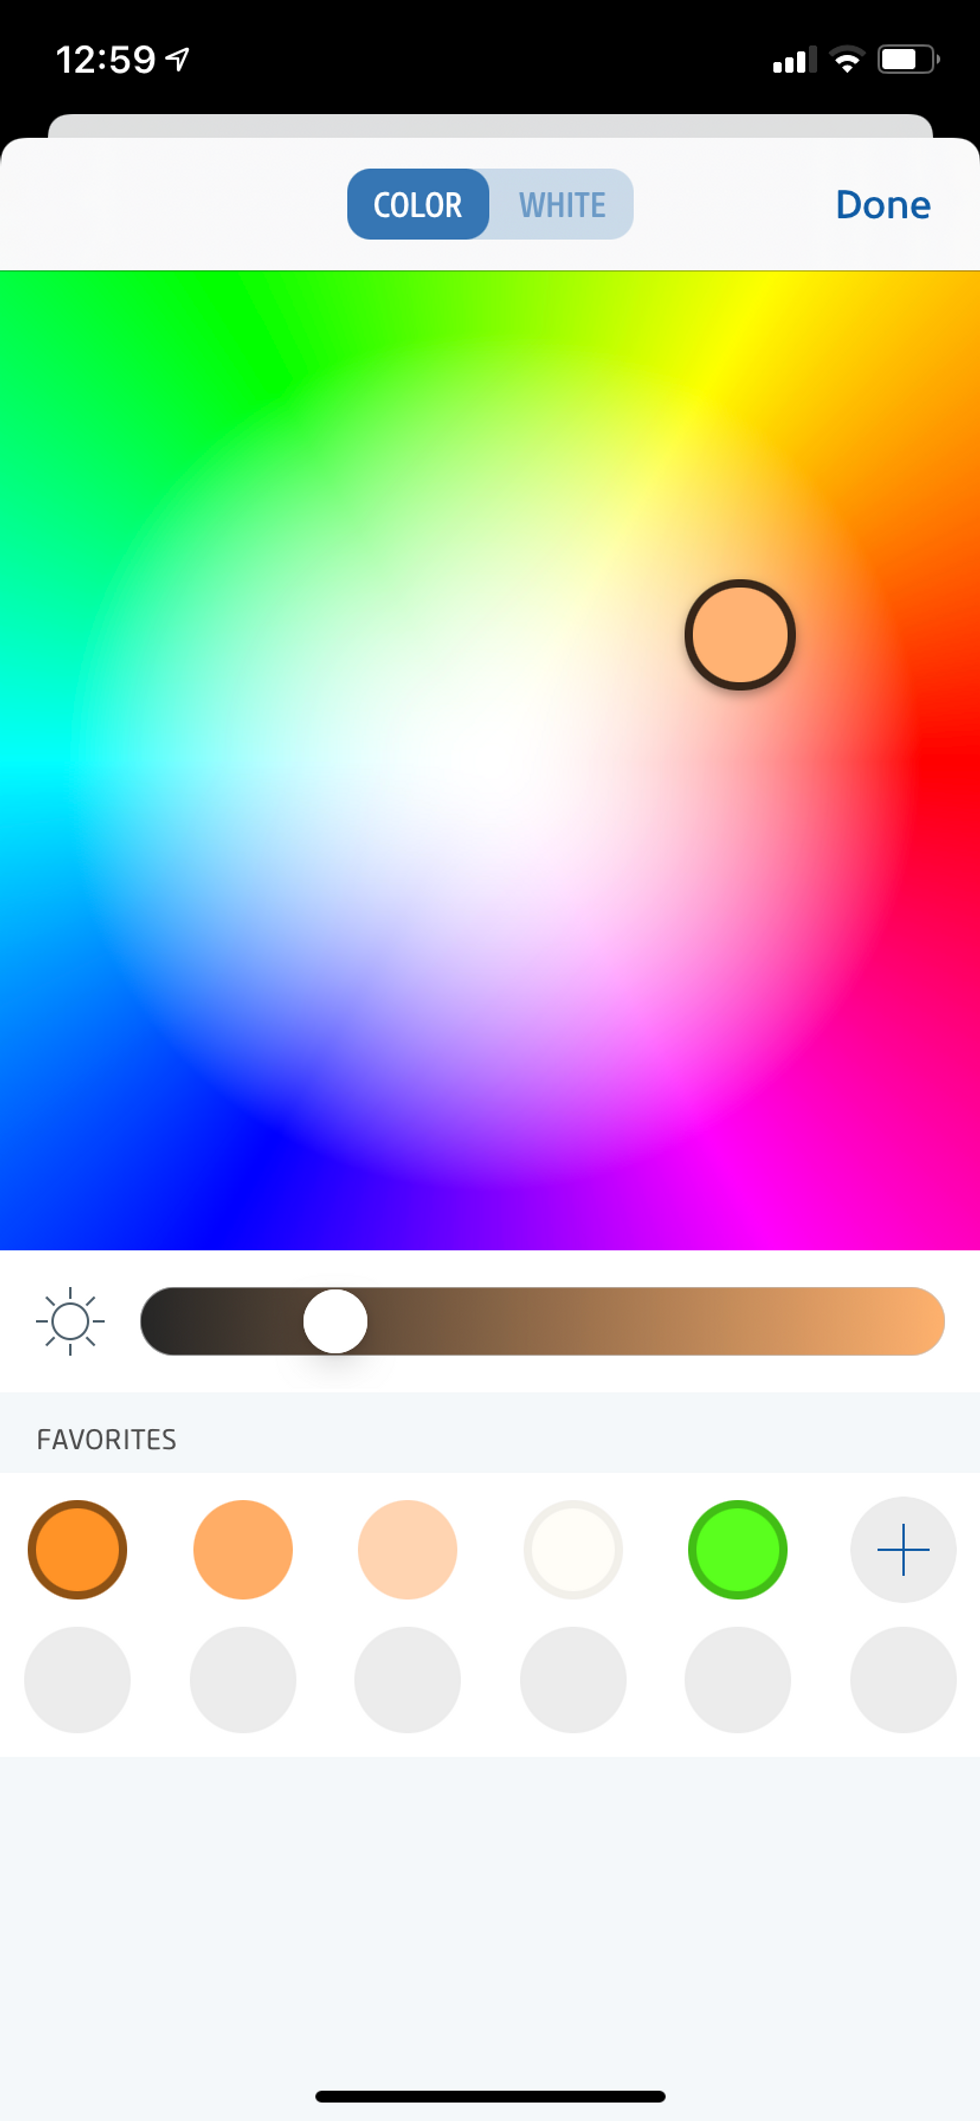 Eve app showing color spectrum for users to use to change light colors.